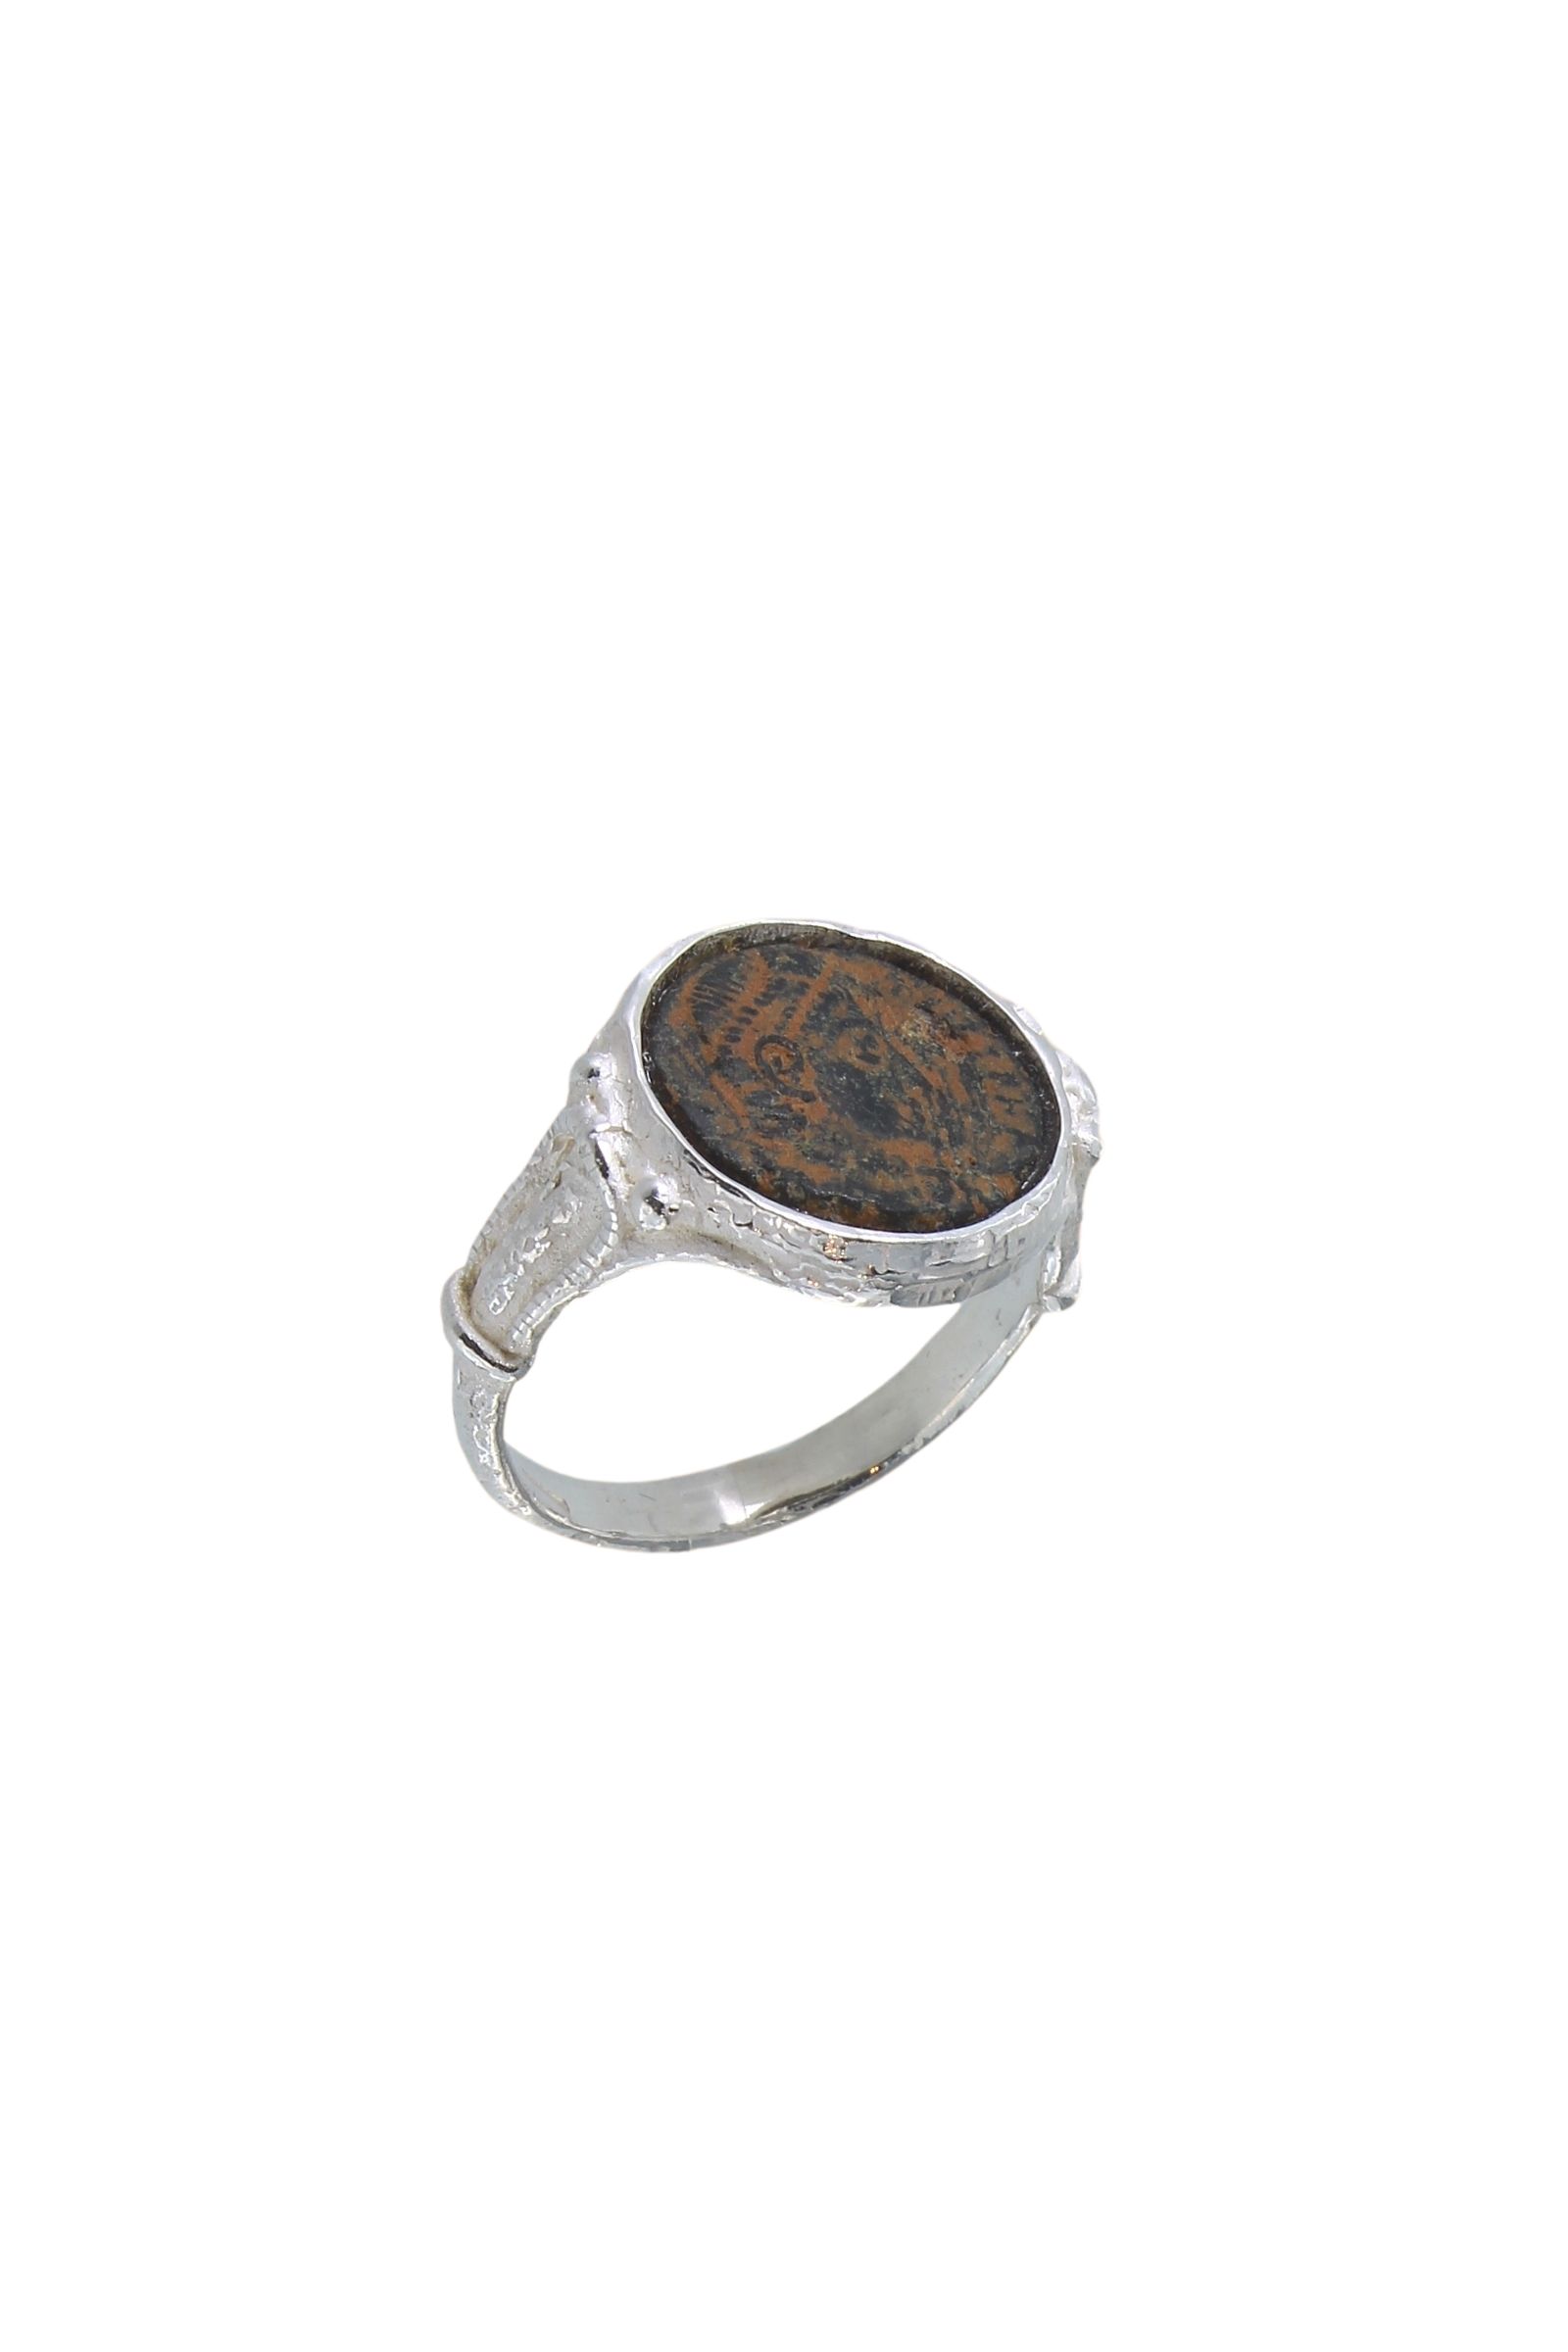 AE605-Sterling-Silver-925-Roman-Coin-Ring-1_